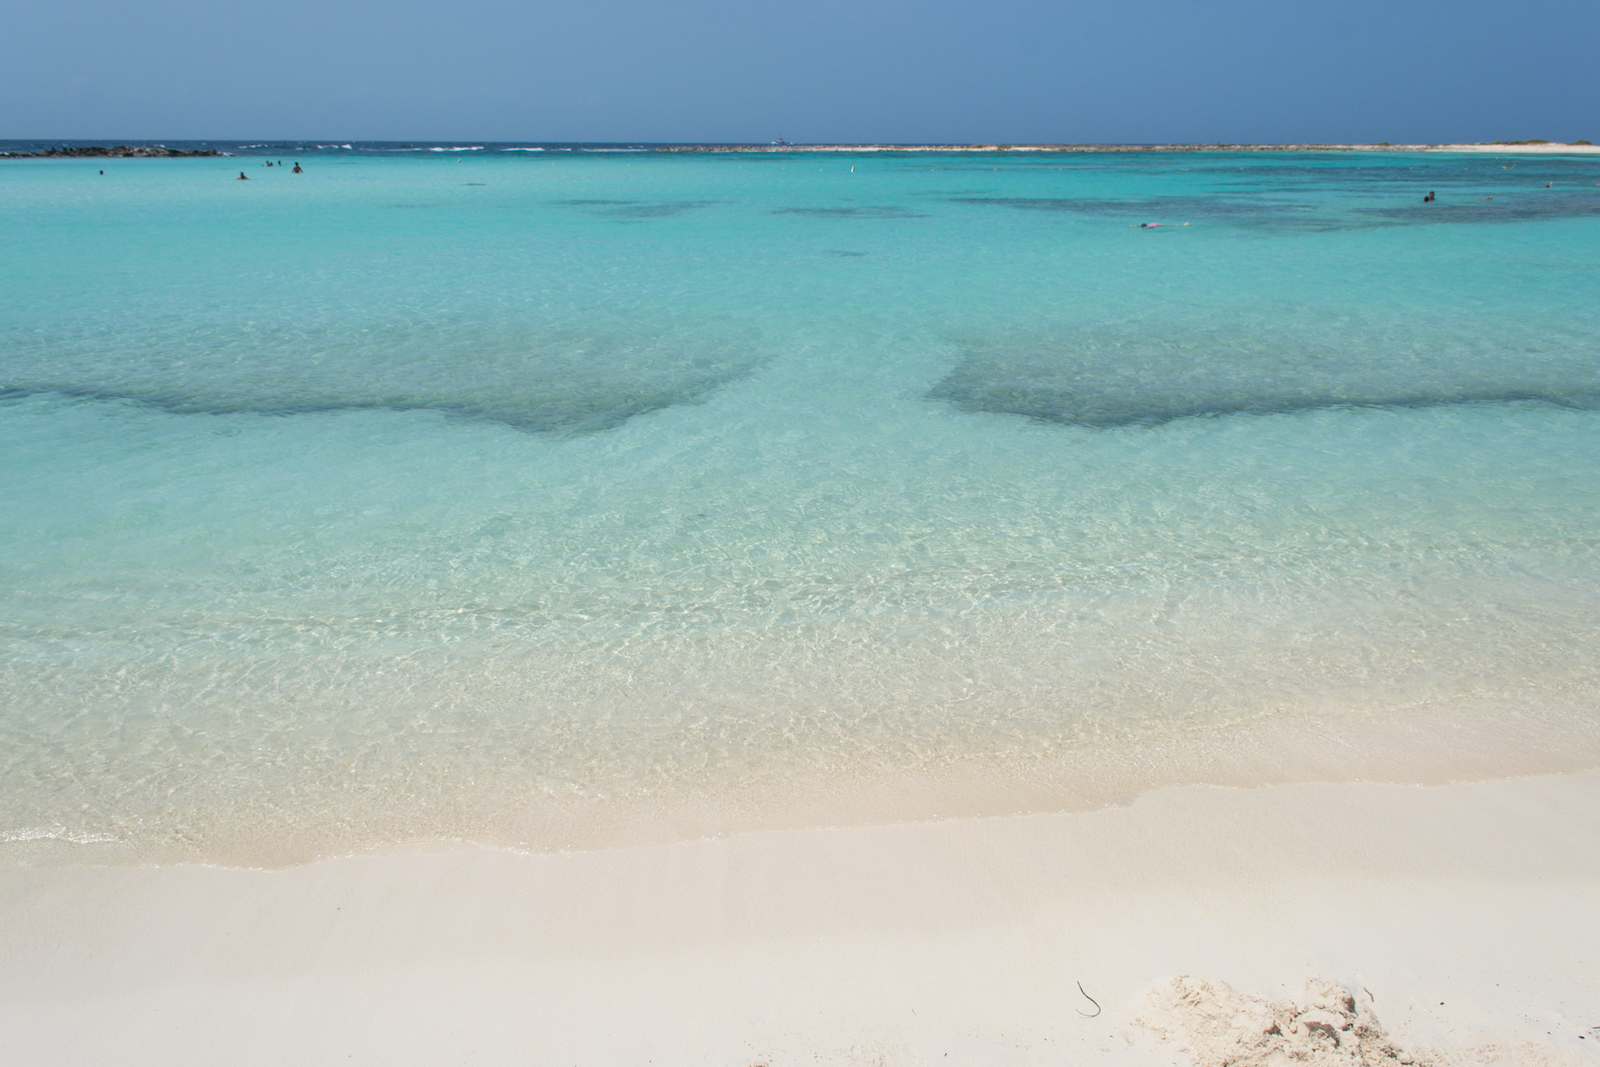 Baby Beach in Aruba has turquoise water and is one of the prettiest beaches I saw there!